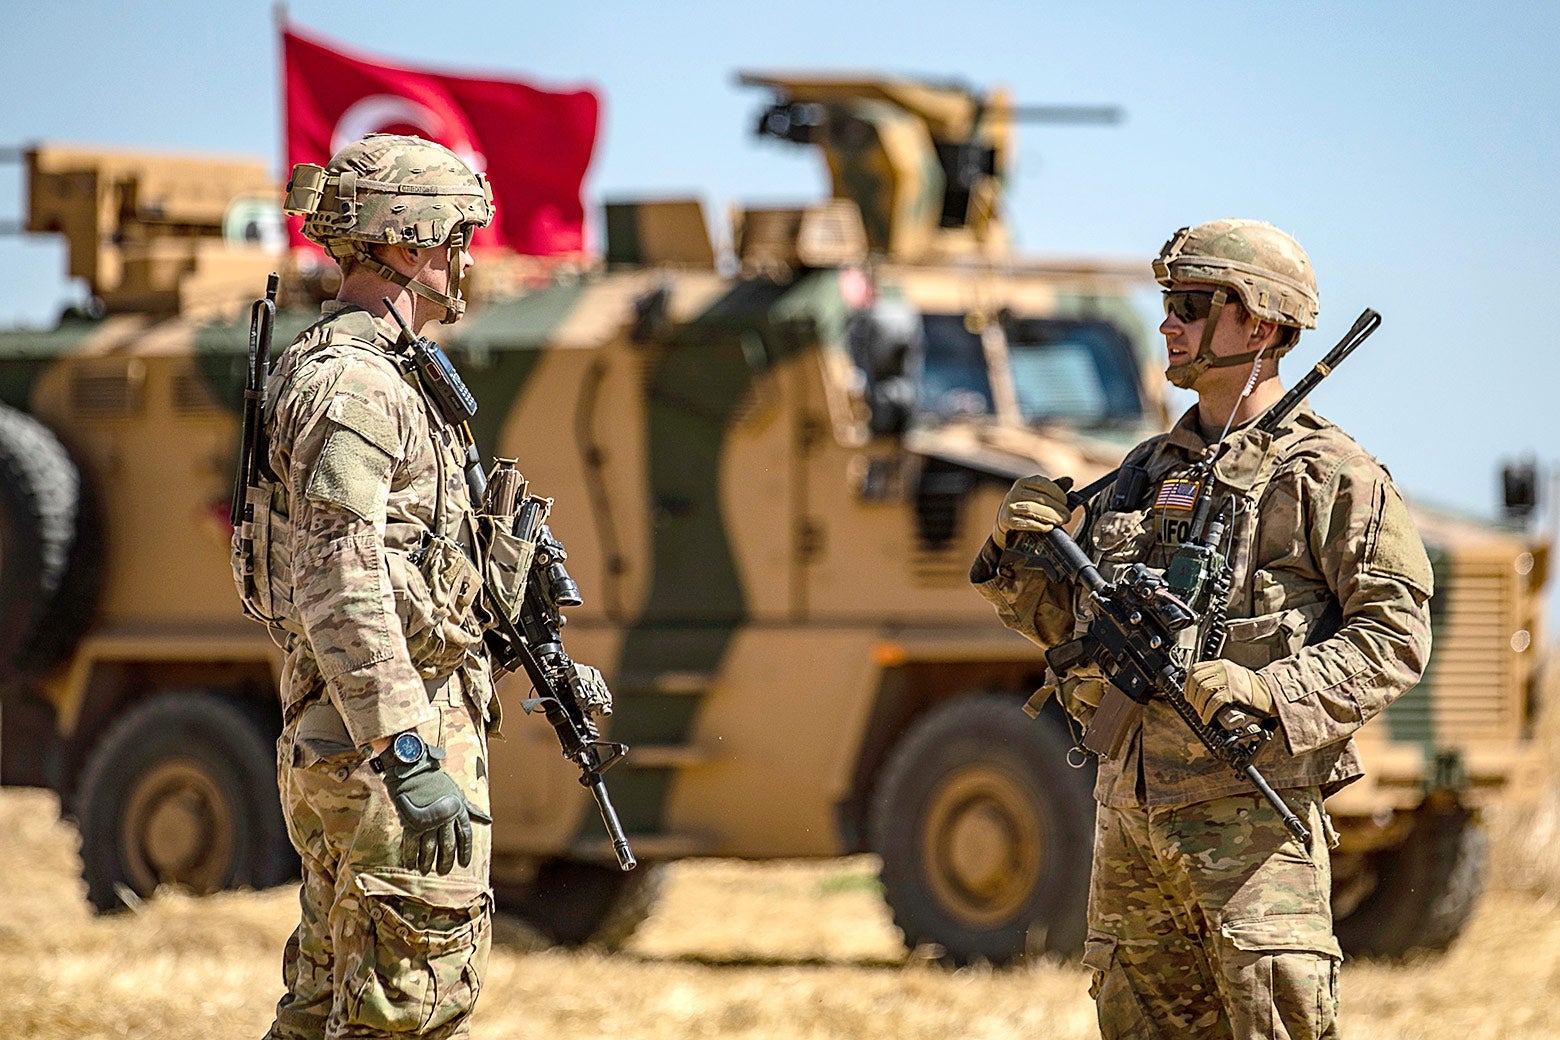 U.S. soldiers chat next to a Turkish military vehicle.